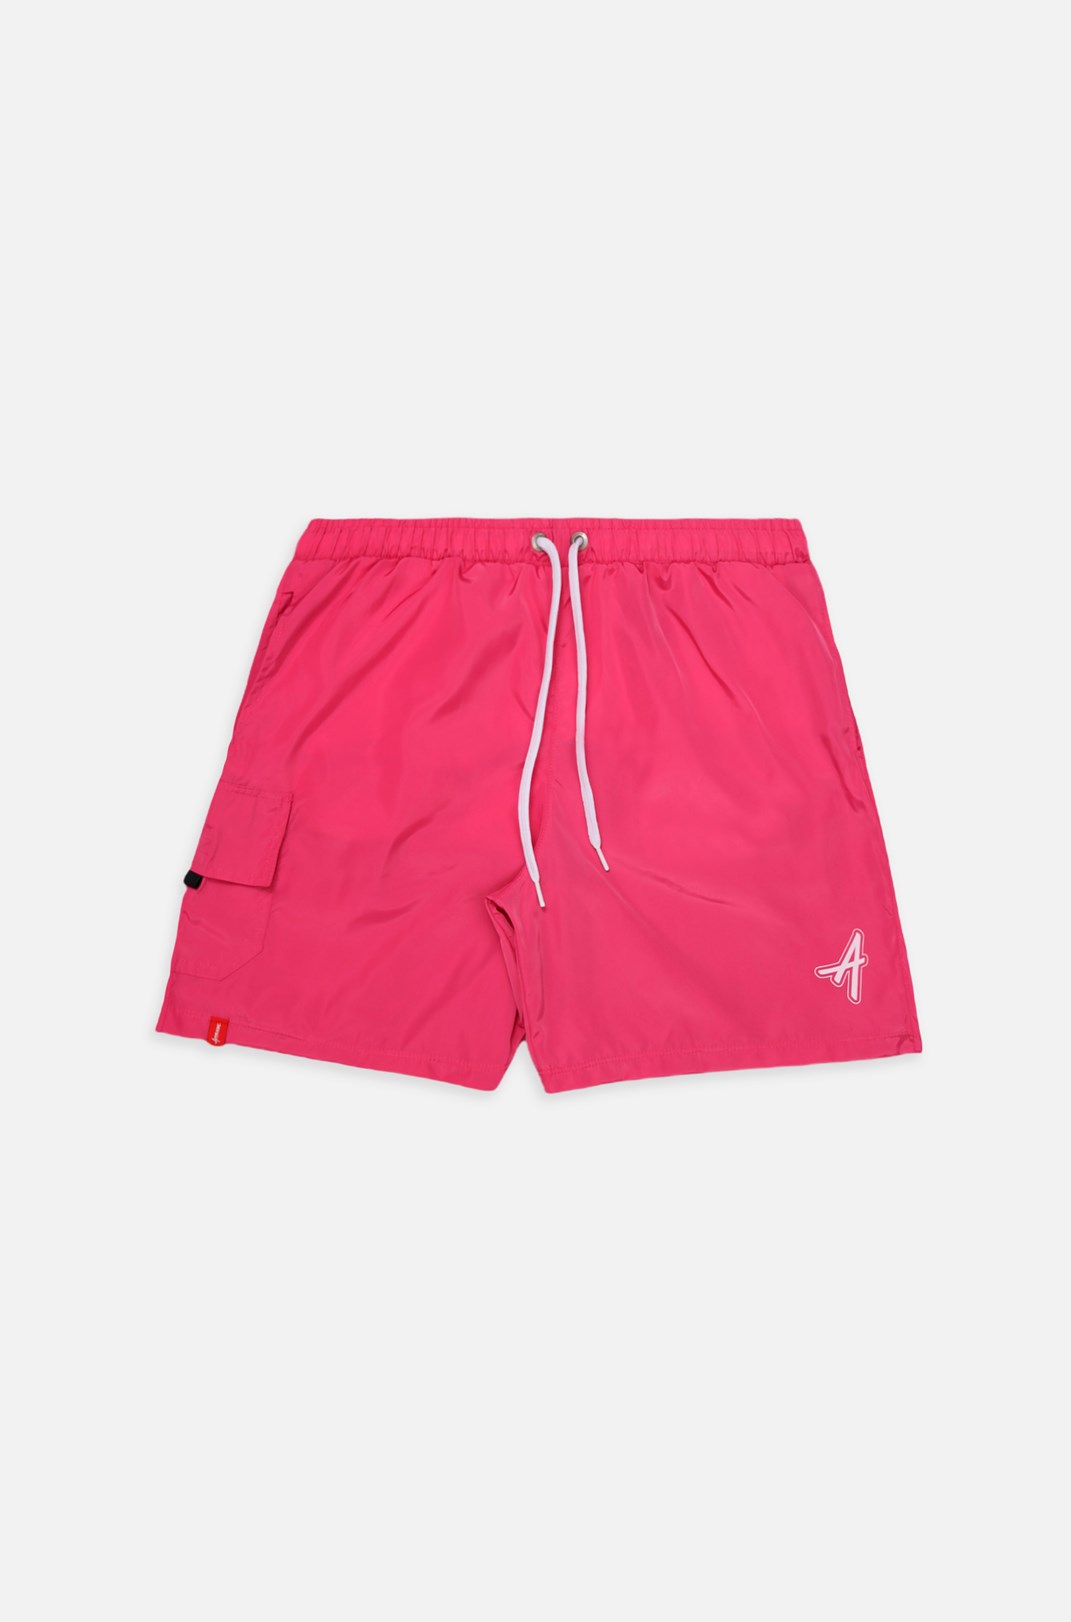 Shorts Approve Pink